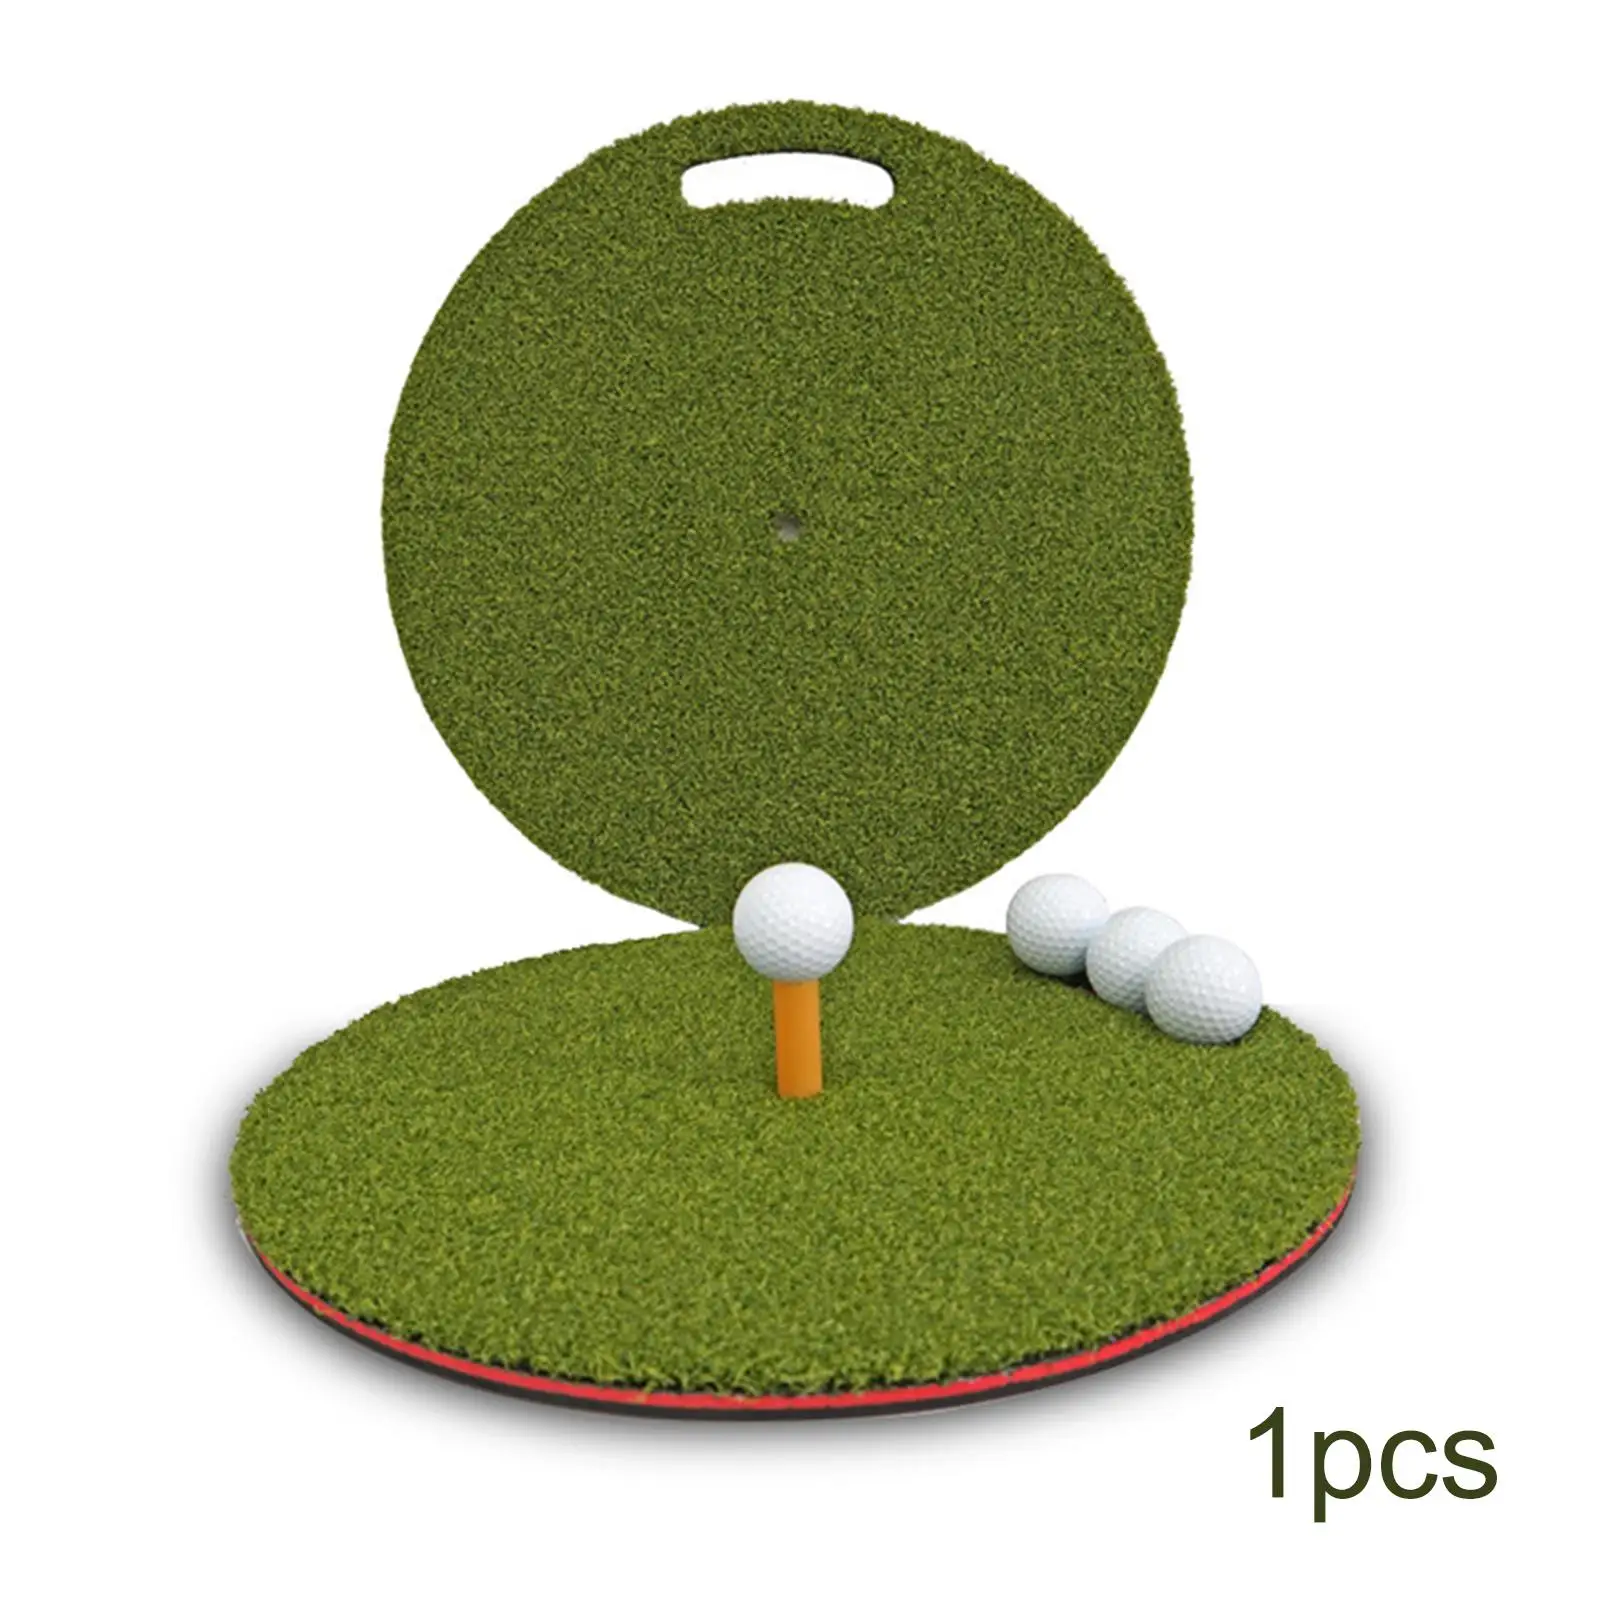 Golf Swing Hitting Mat Portable Golf Turf Mat Realistic Grass Putting Mat with Rubber Base Indoor Swing Tool